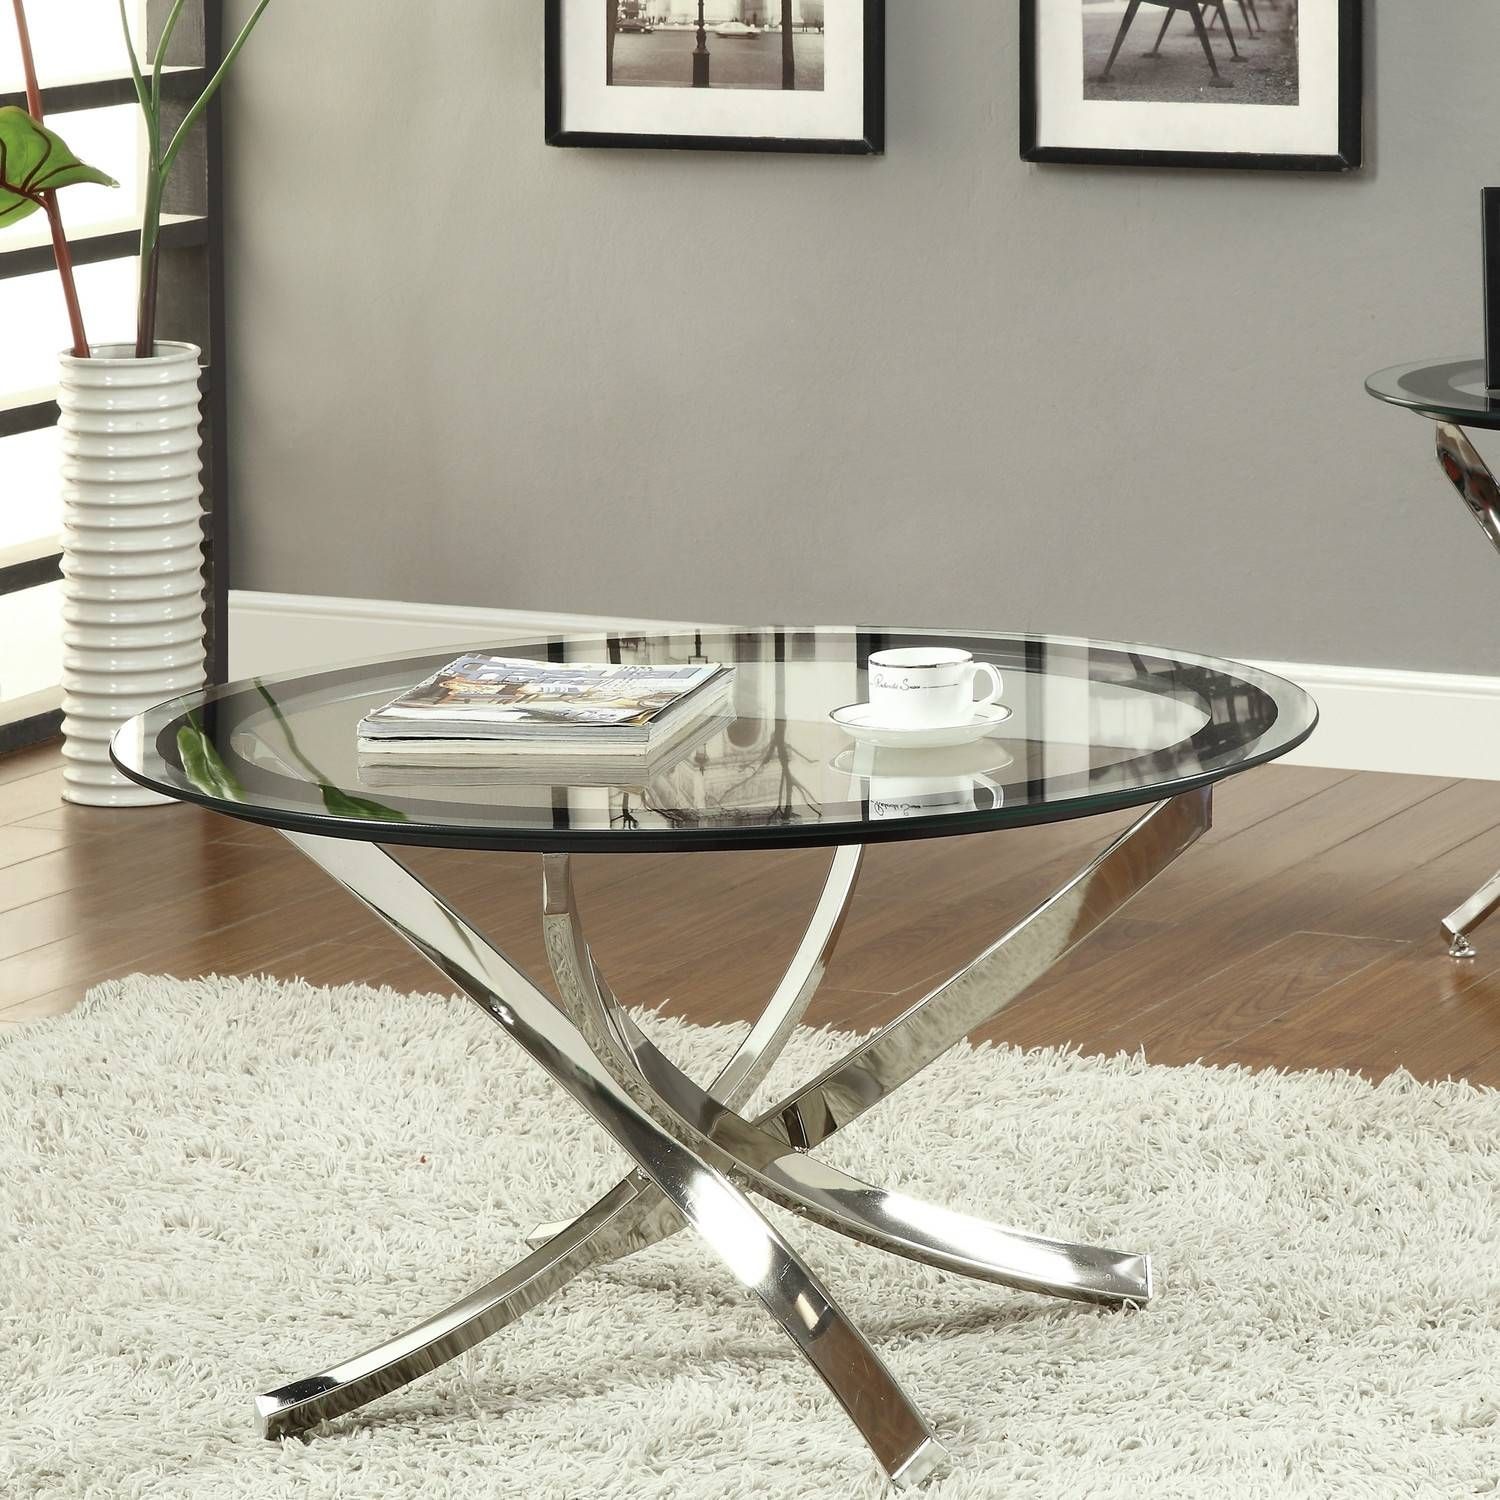 Sturdy Modern Glass Coffee Table Metal Legs Construction 4 Legs With Regard To Chrome Leg Coffee Tables (View 28 of 30)